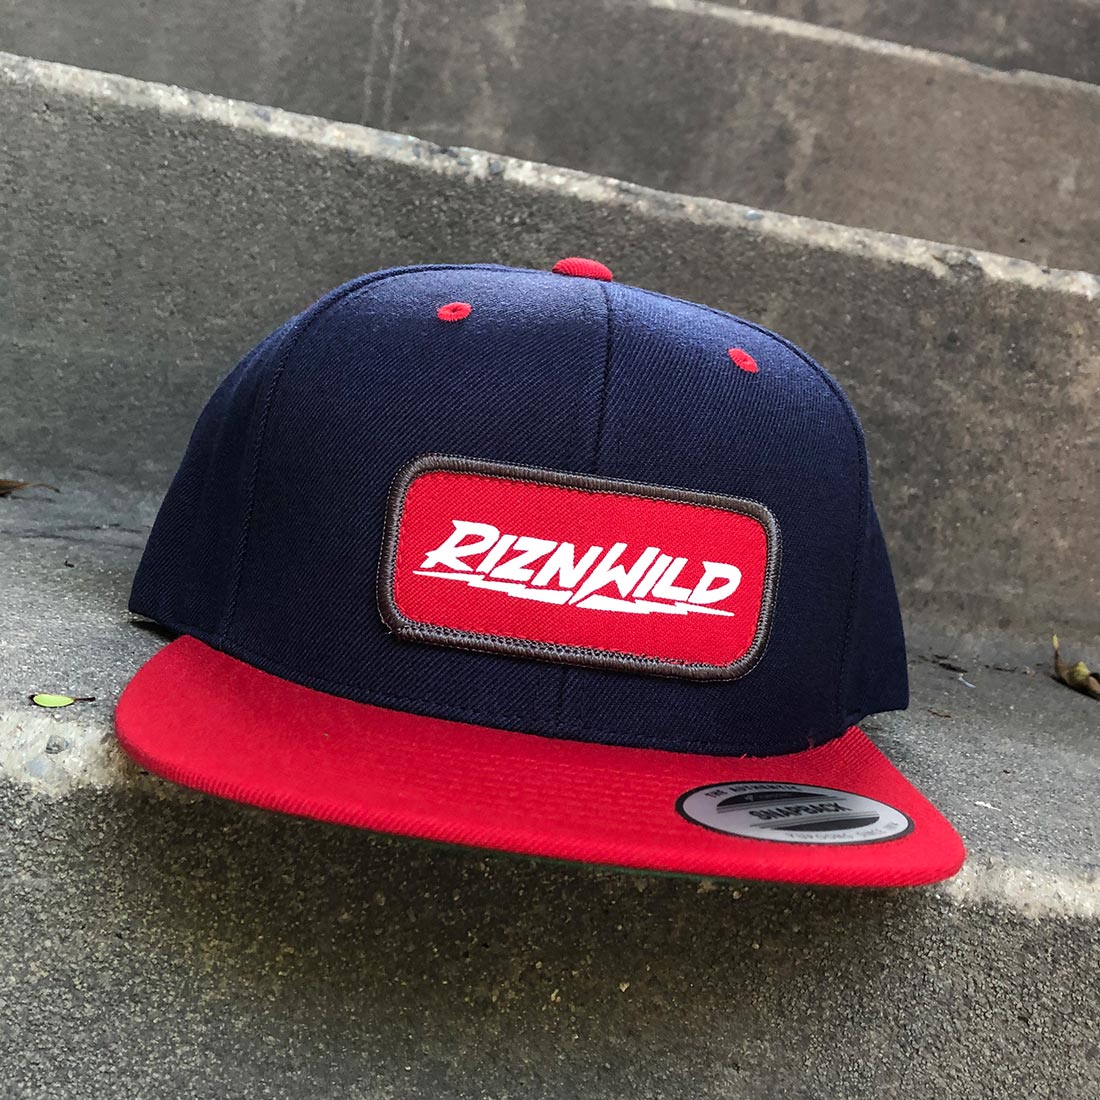 RIZNWILD | Red White and Grey patch on a flex fit hat